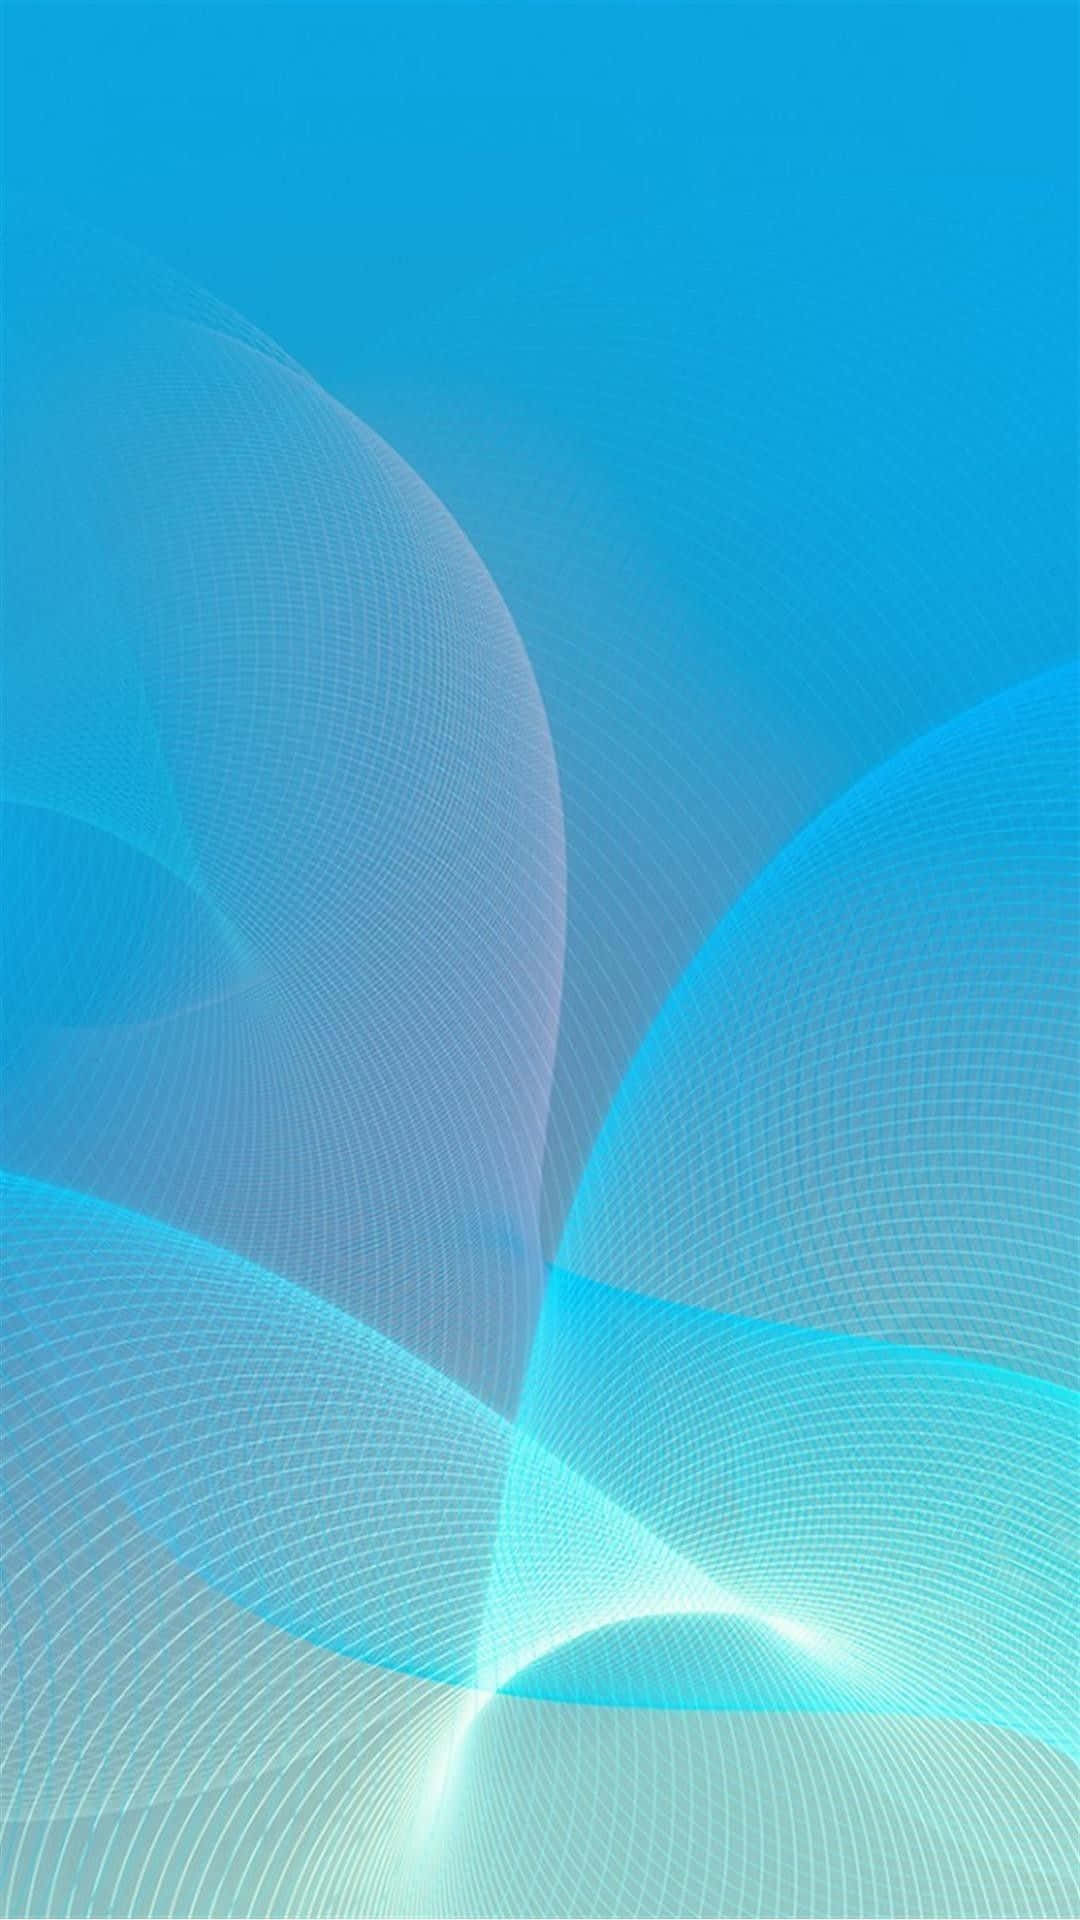 Up your game with this revolutionary cool blue abstract iPhone Wallpaper